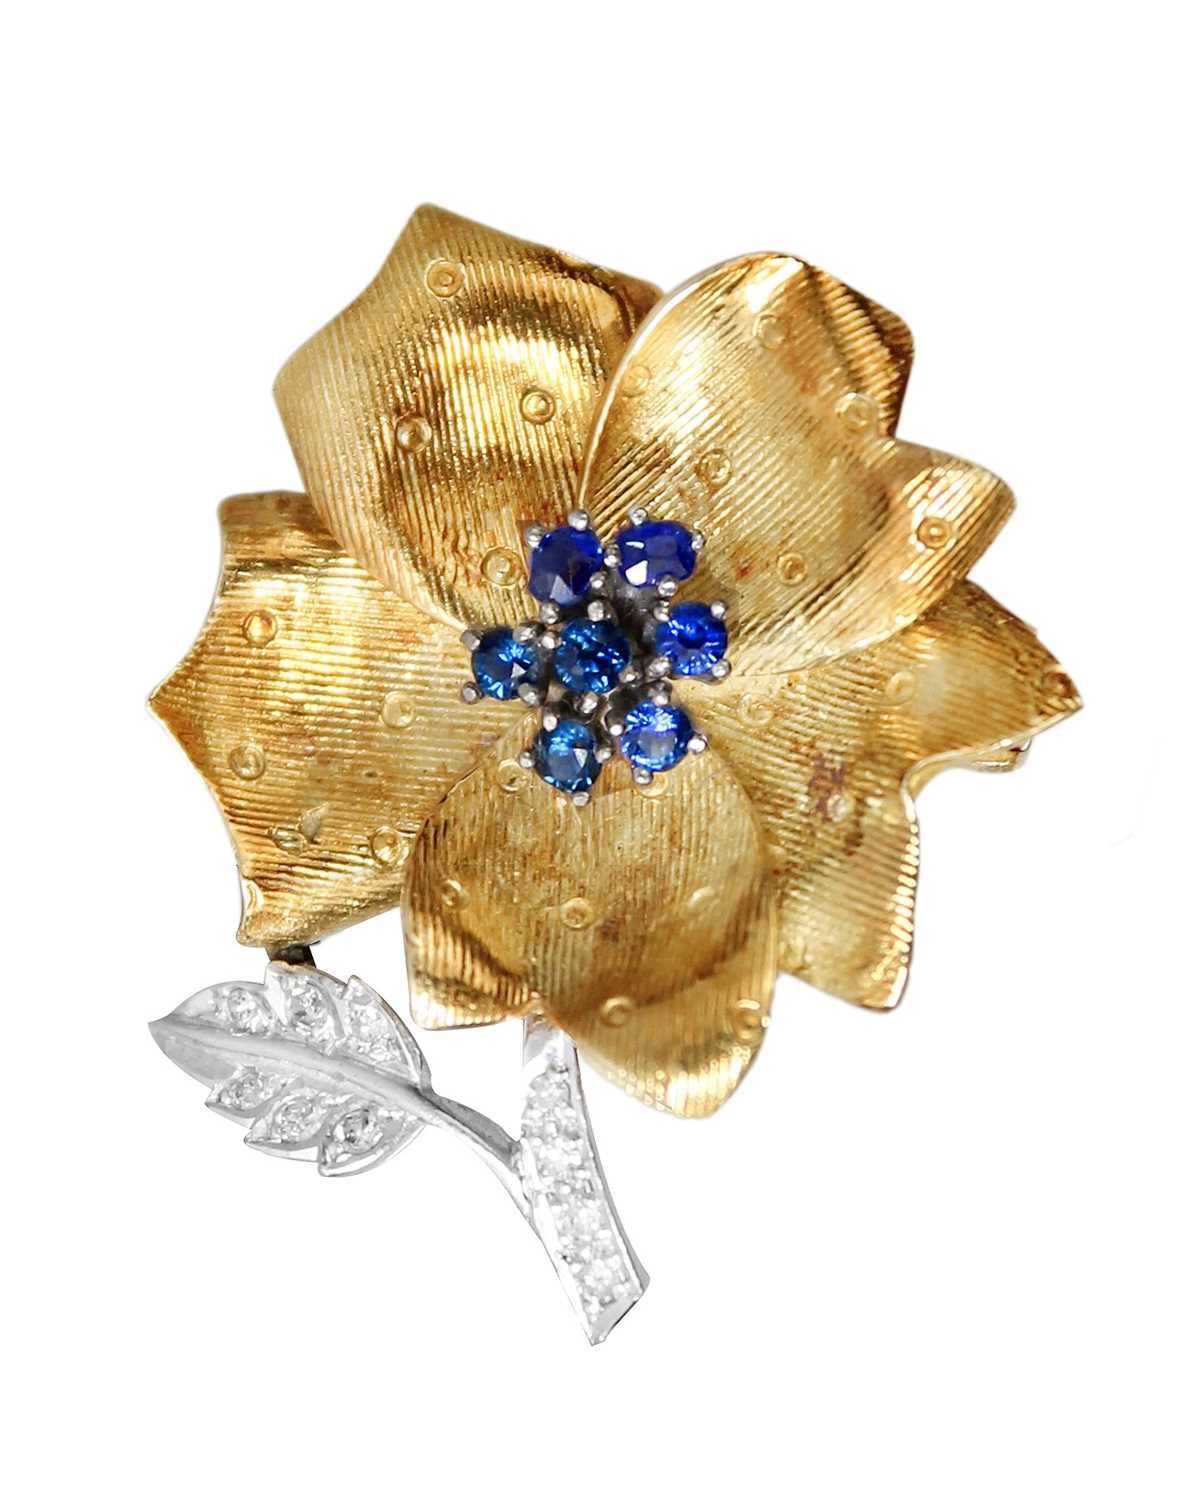 Lot 142 - A Ben Rosenfeld for Asprey 18ct white and yellow gold diamond and sapphire set flower brooch.